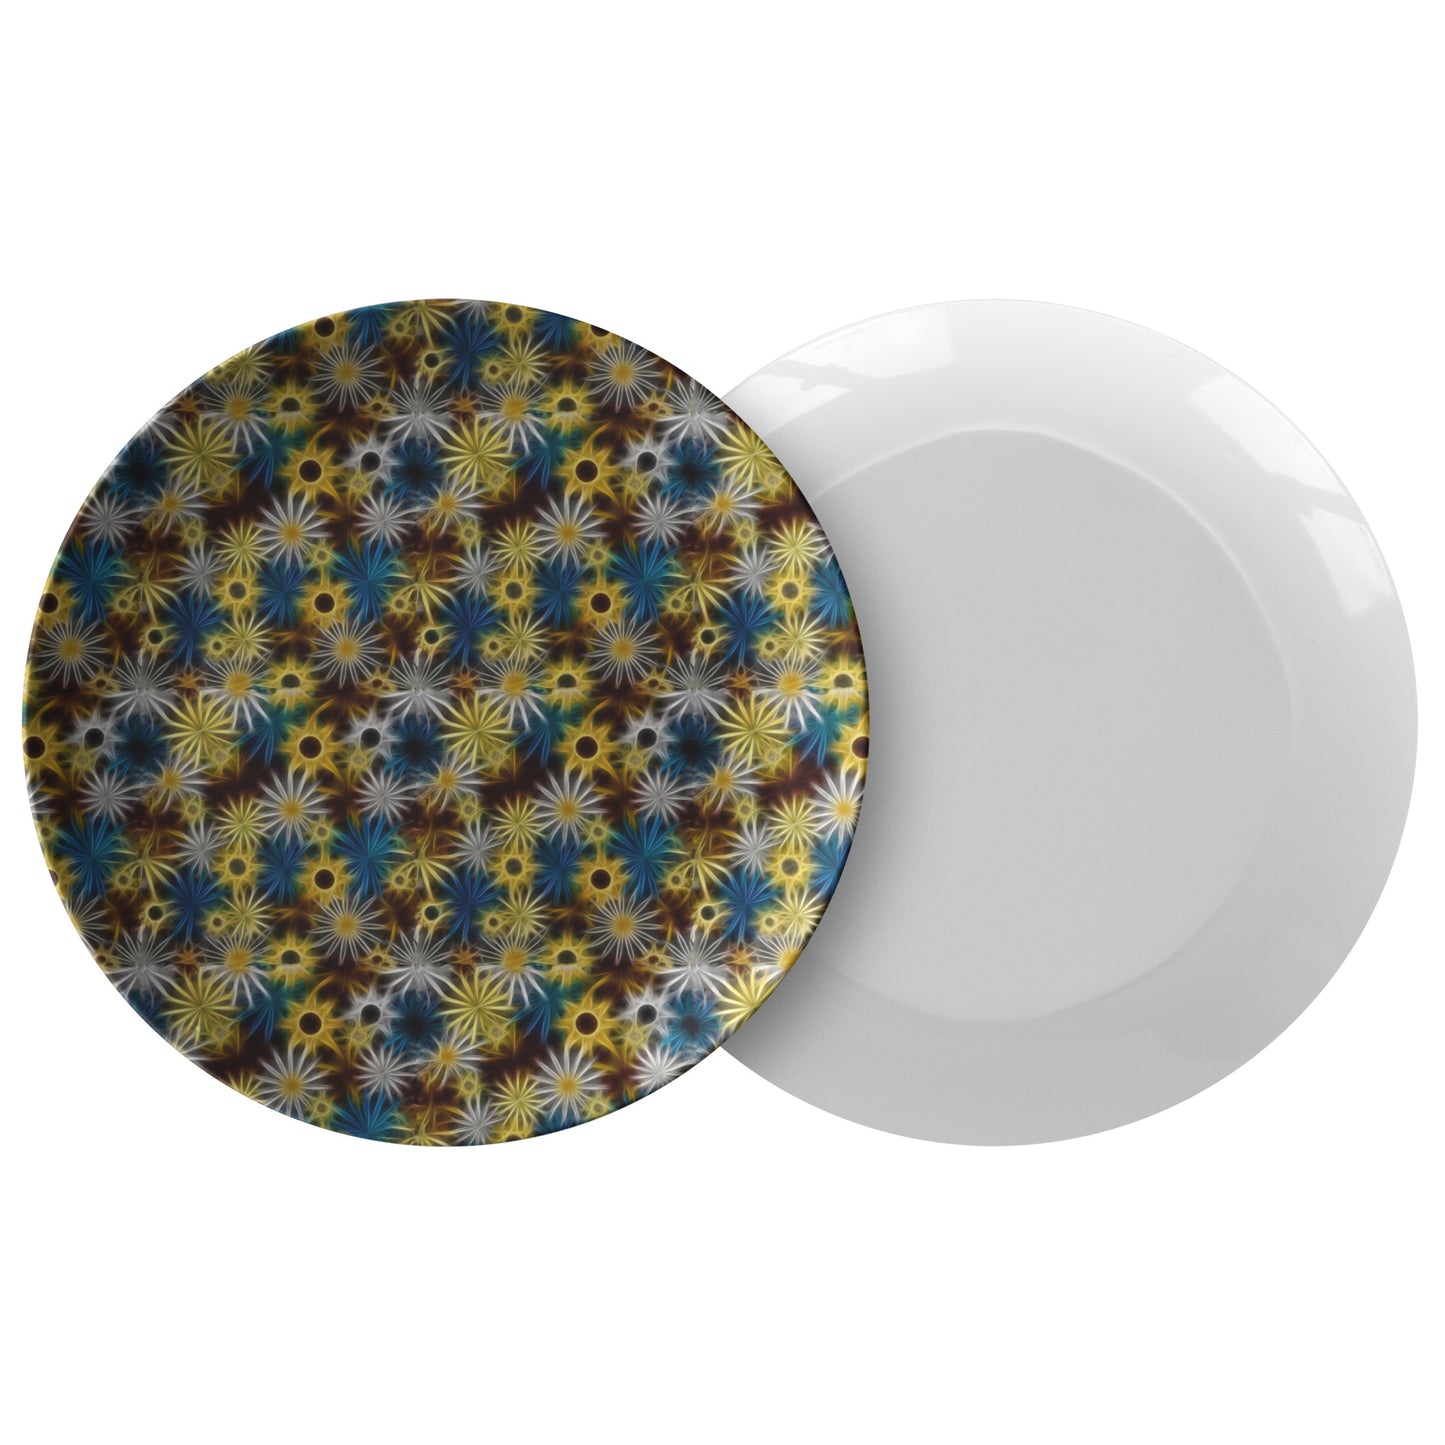 Blue and Yellow Glowing Daisies Dinner Plate